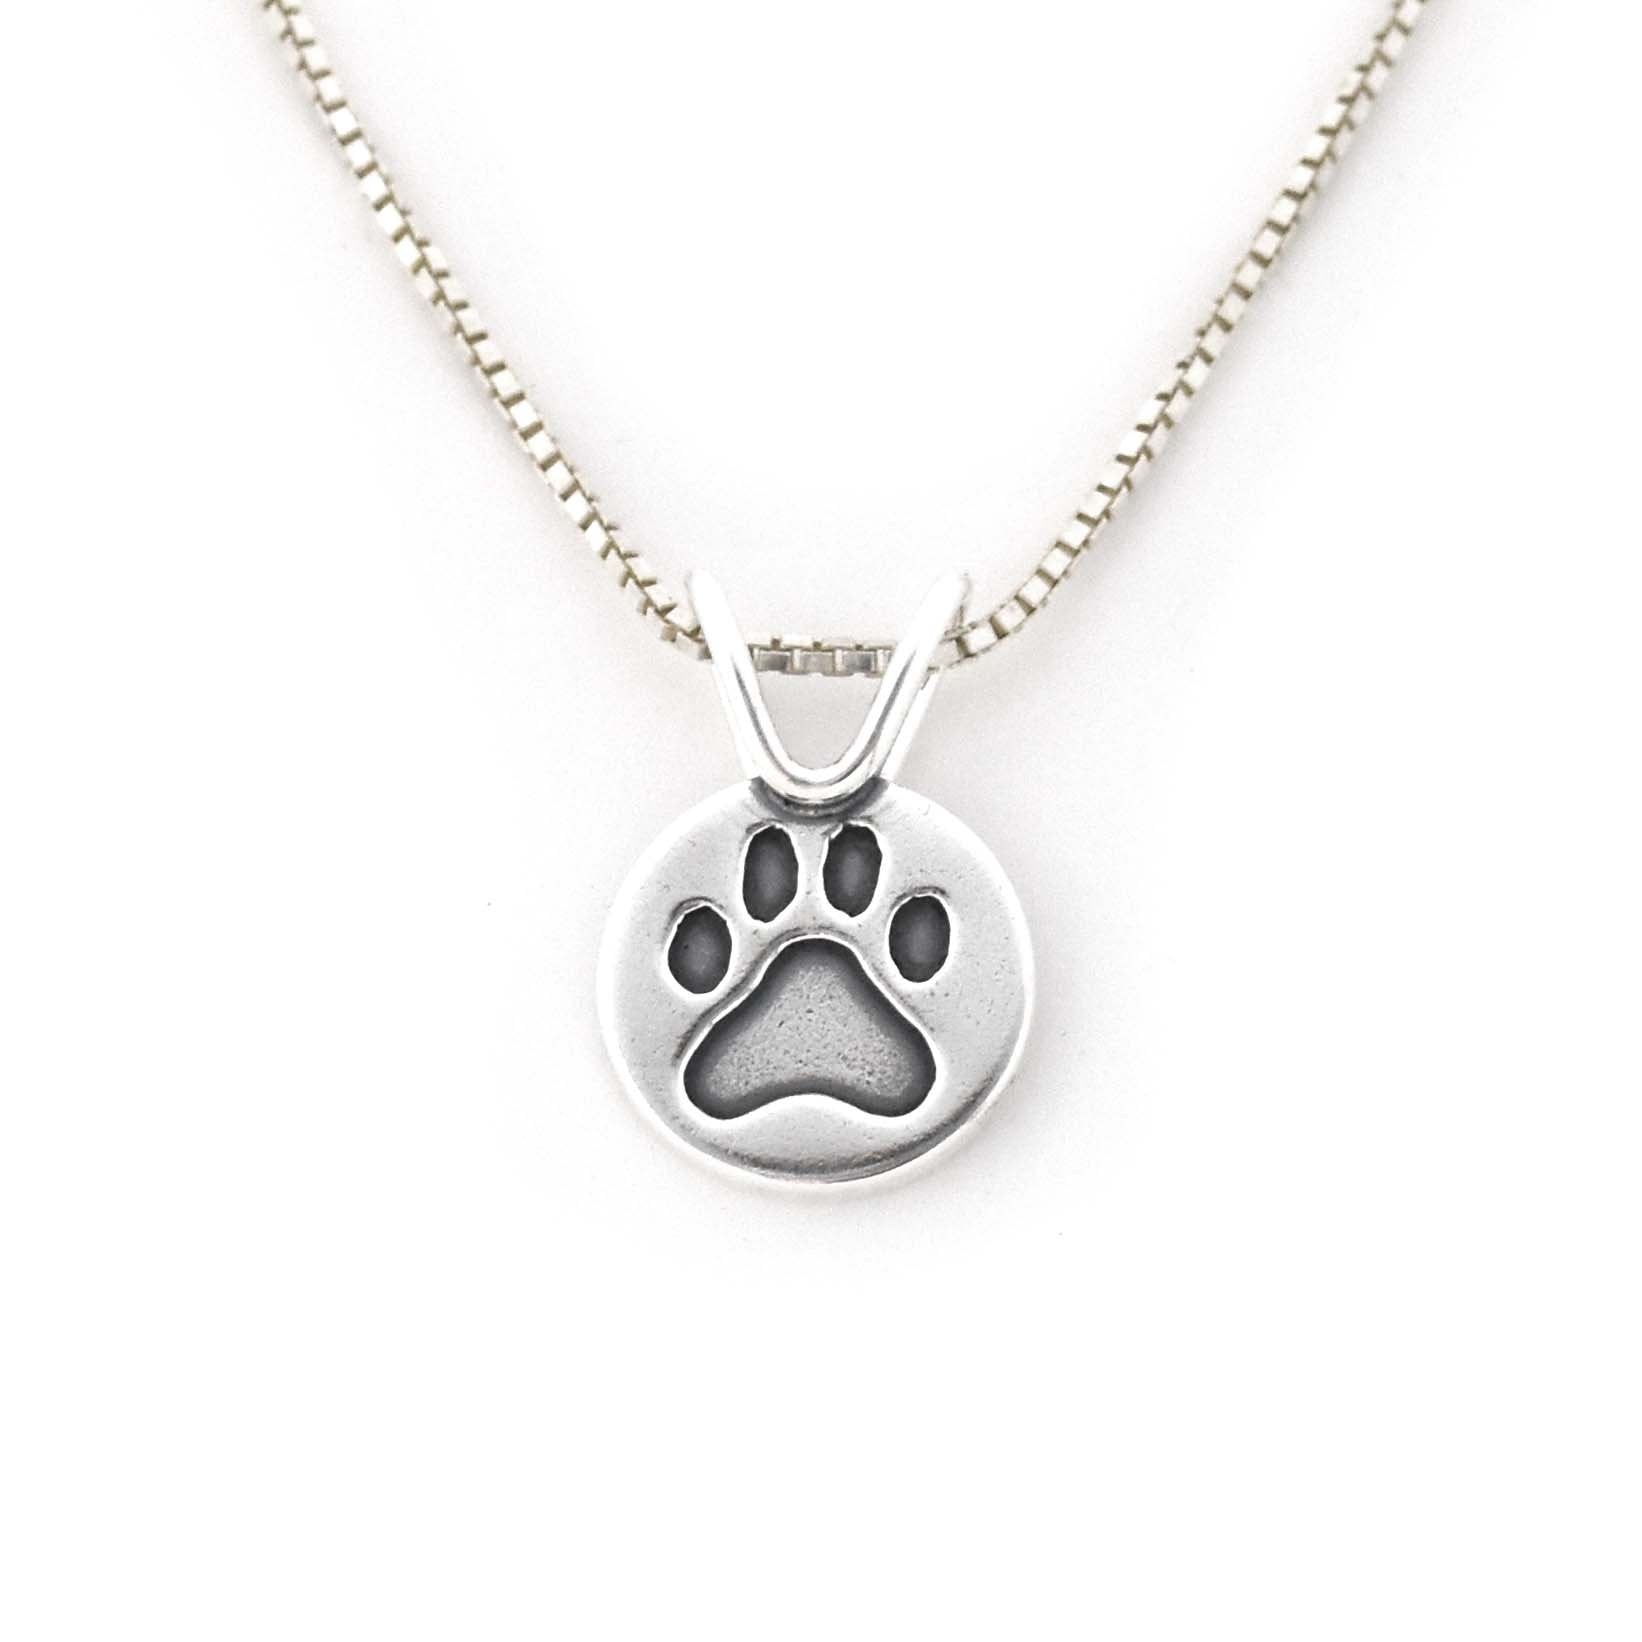 Paw print heart pendant - a beautiful heart shaped pewter pendant with paw  prints.